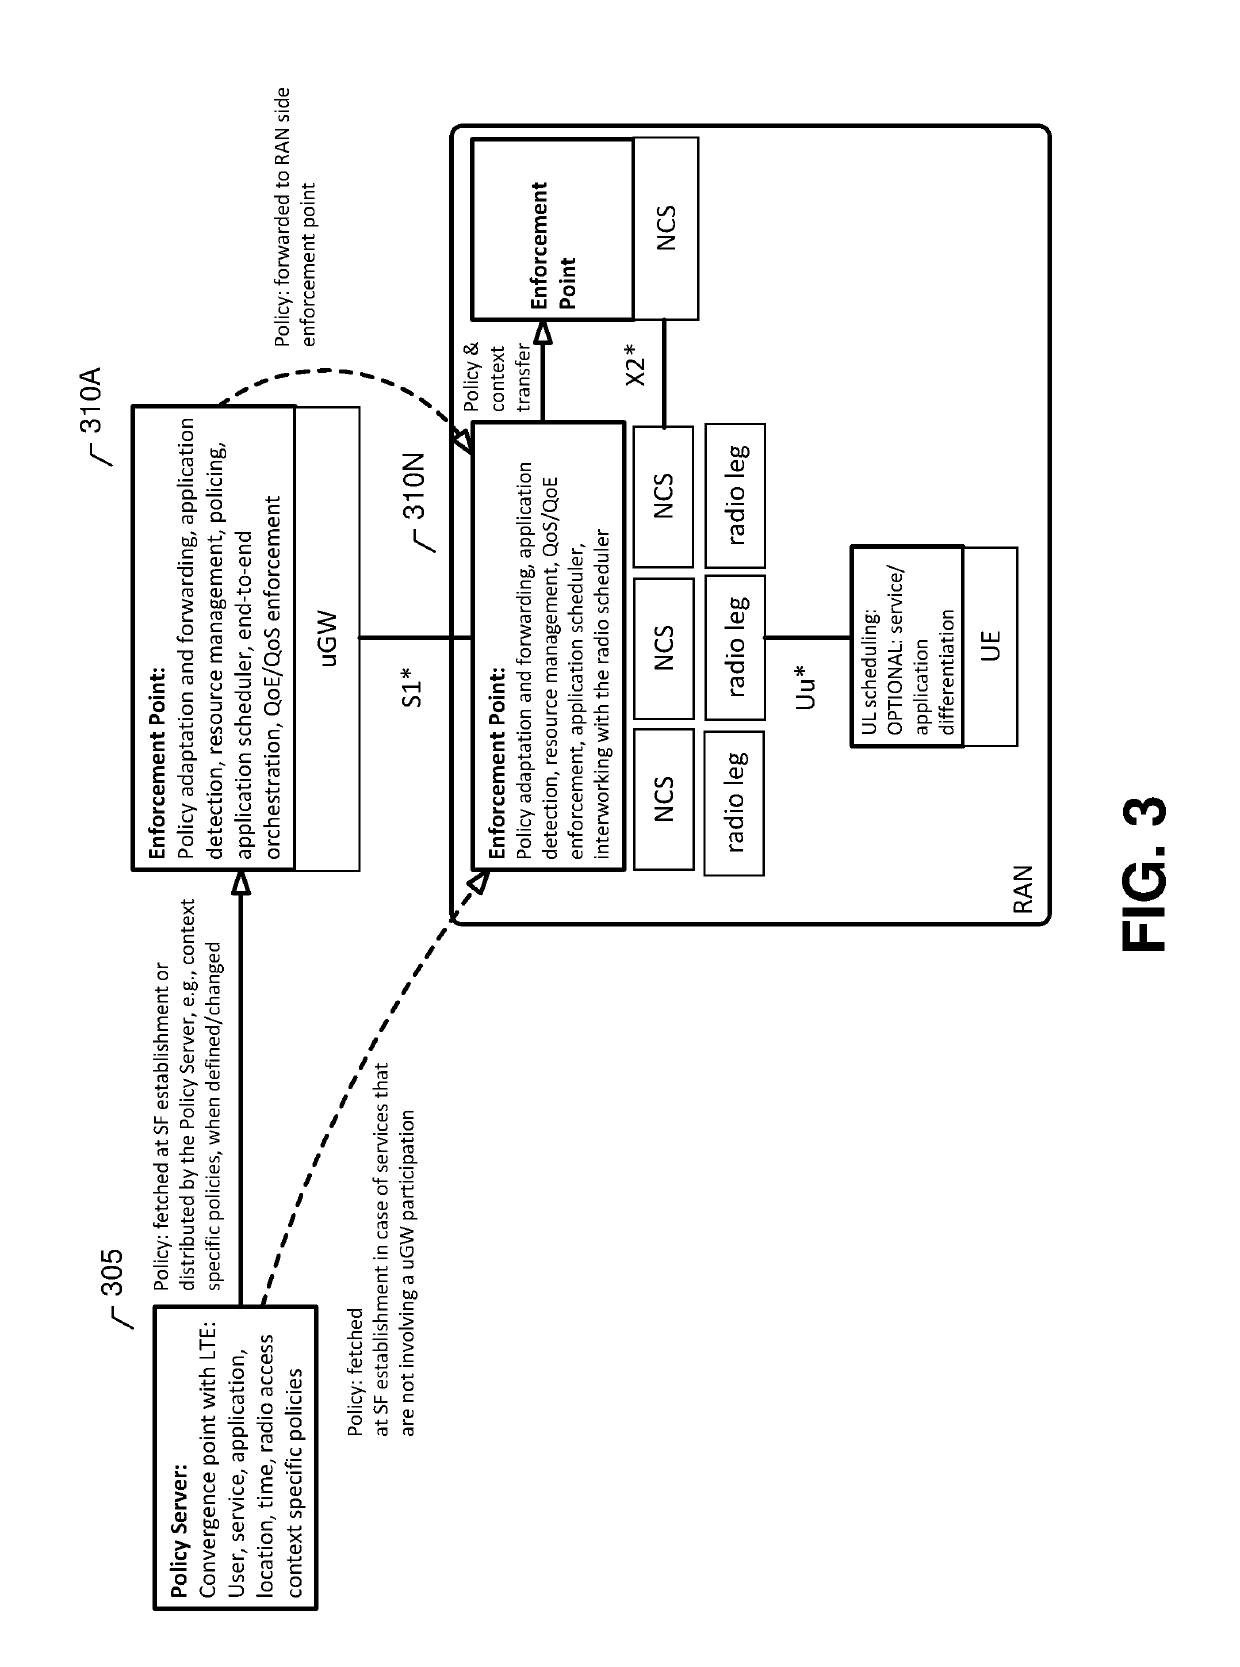 Method and apparatus for end-to-end QoS/QoE management in 5G systems